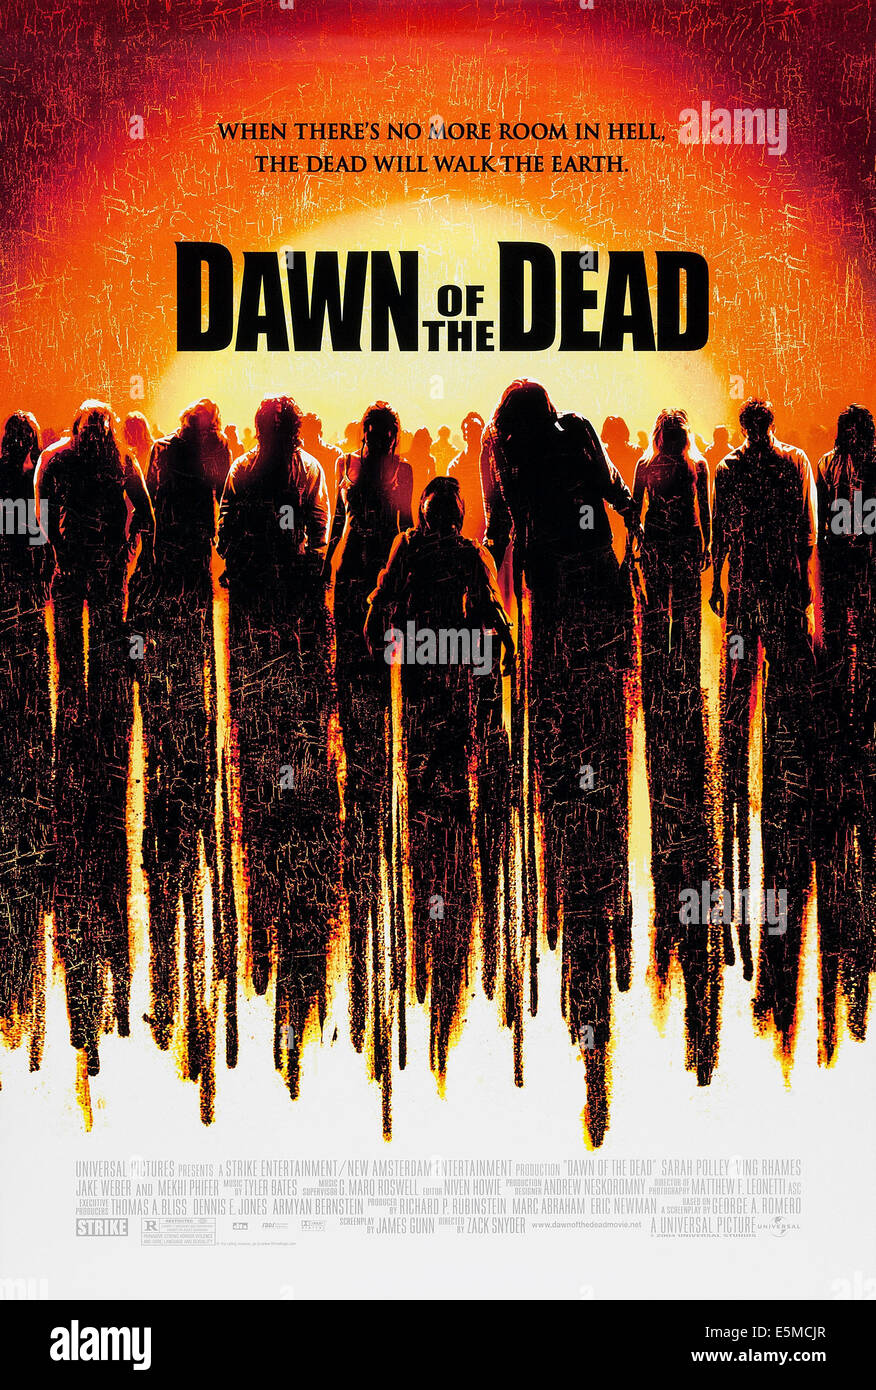 DAWN OF THE DEAD, 2004, ©Universal Pictures/courtesy Everett Collection Stock Photo